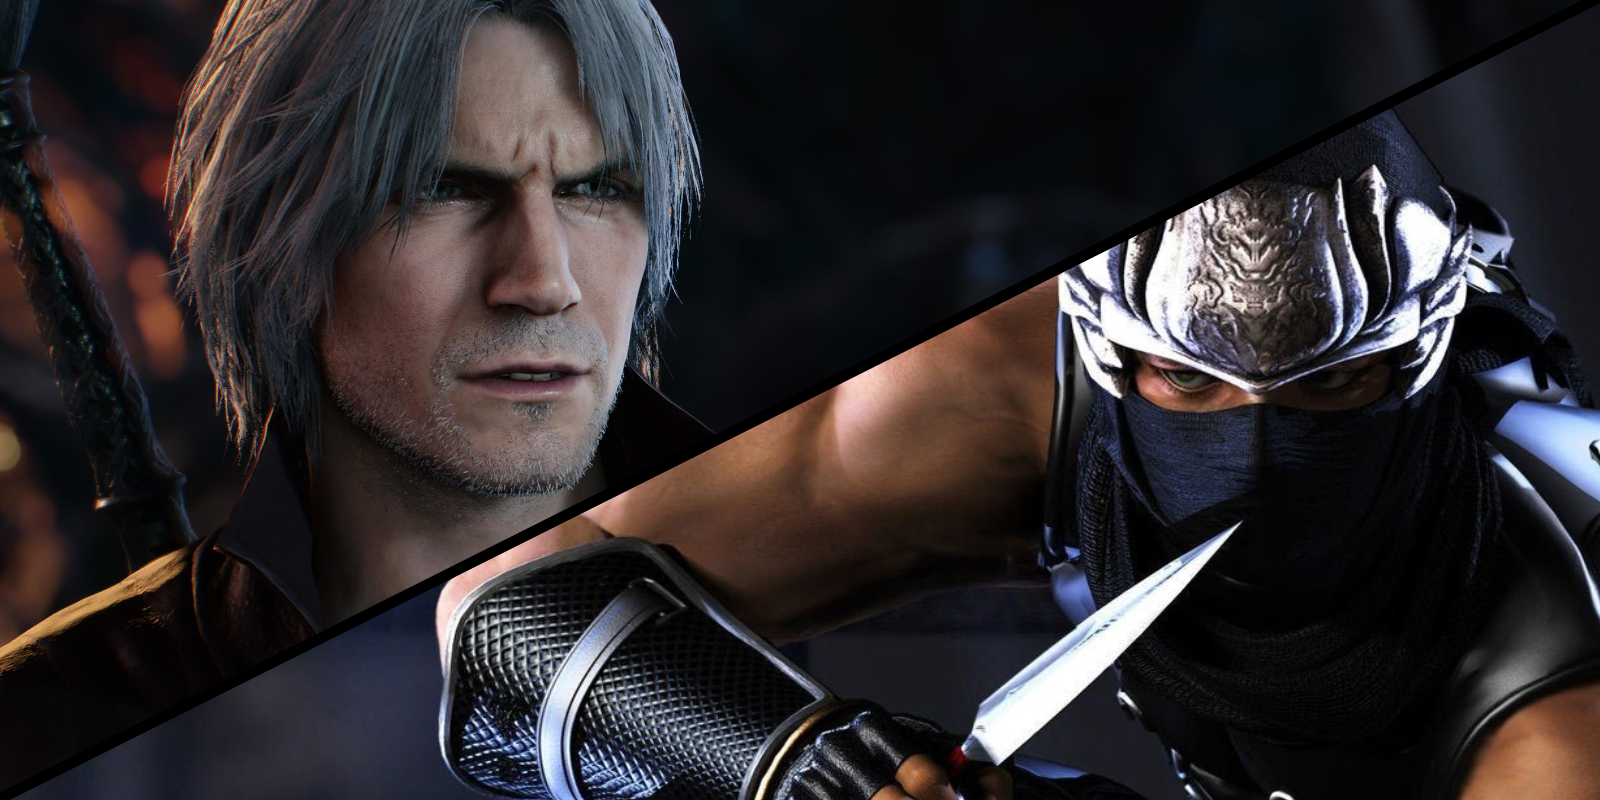 Devil May Cry and Ninja Gaiden: The Two Extremes of the Hack-and-Slash Genre